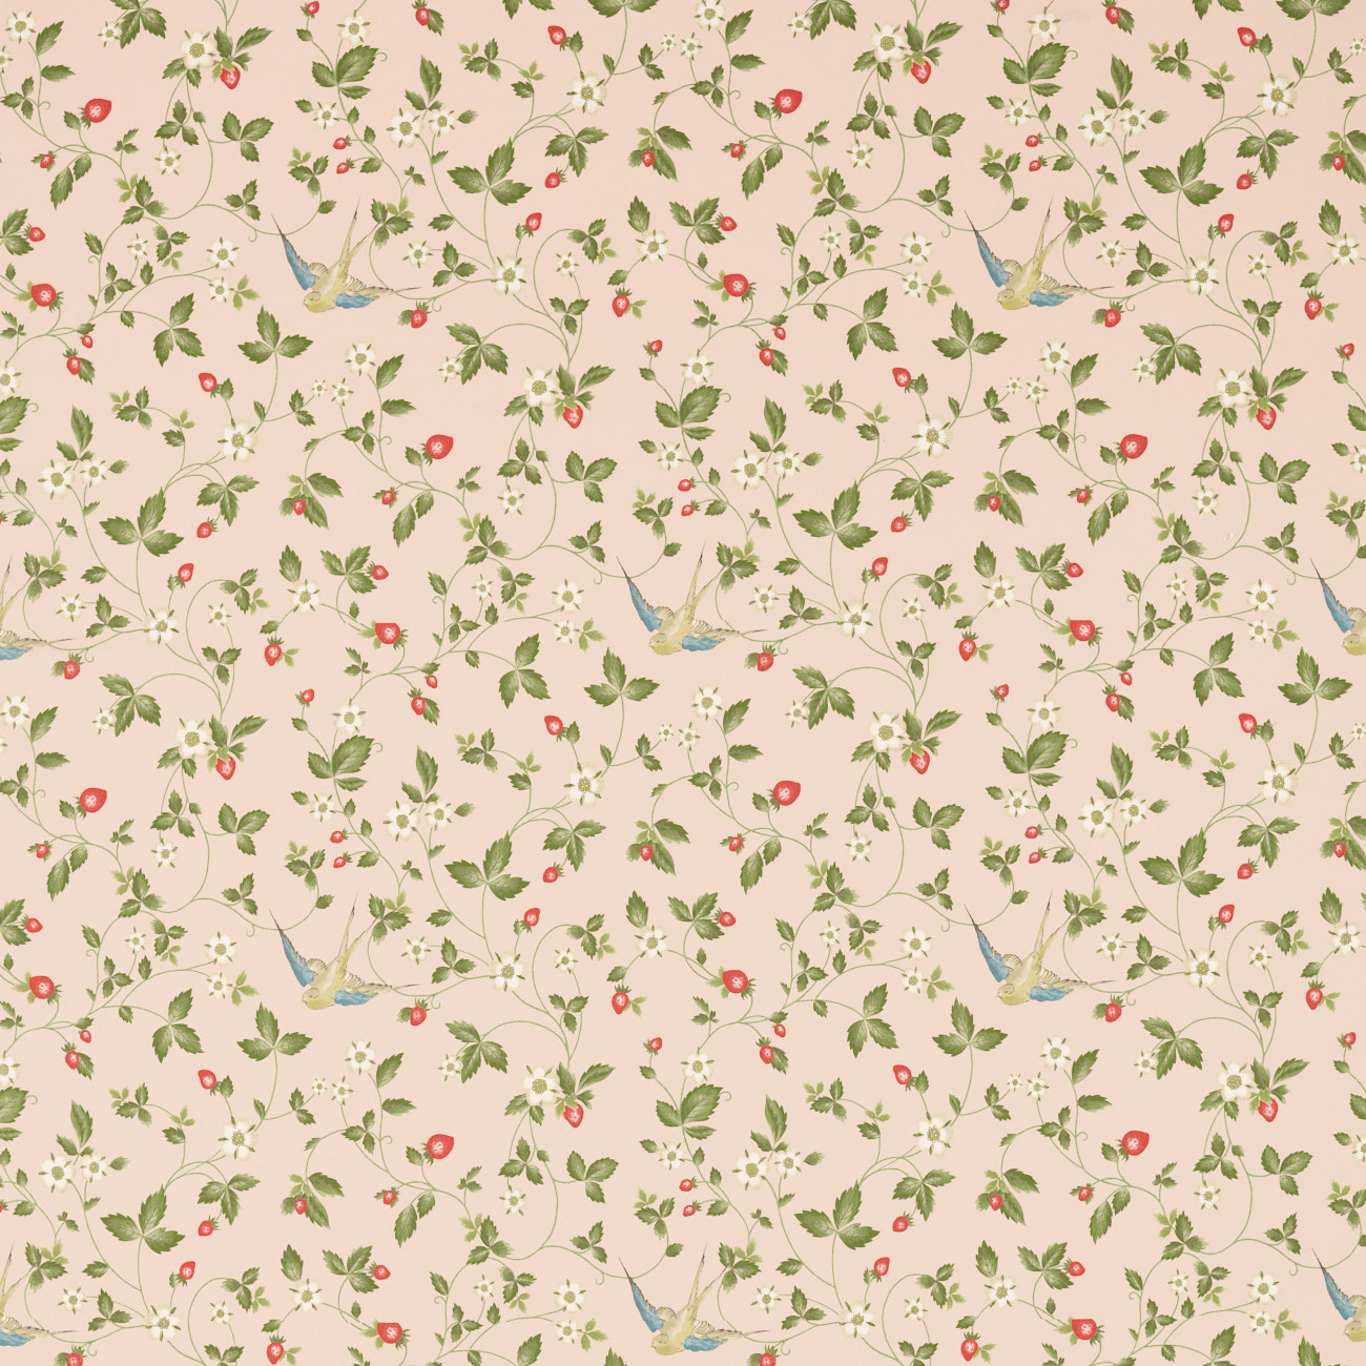 Wild Strawberry Blush Linen Fabric by WED